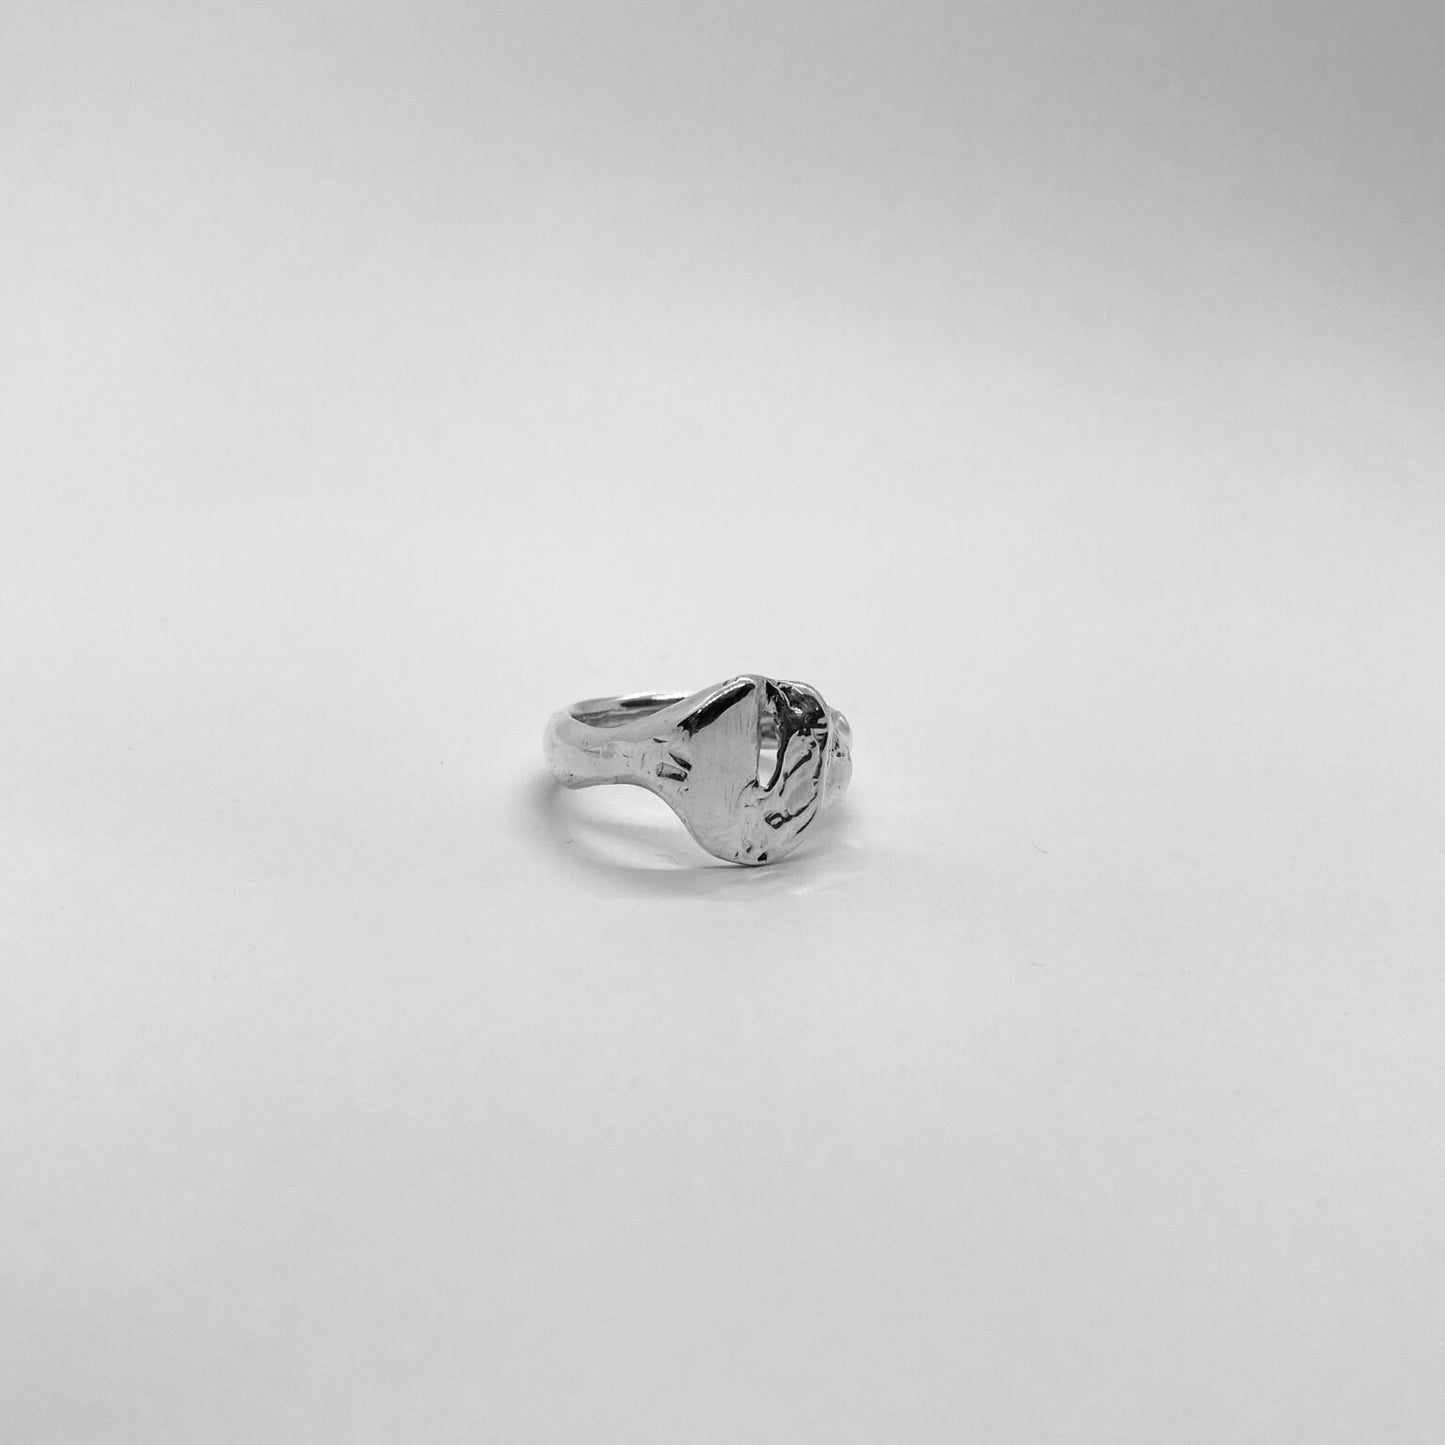 The Slot ring is a handmade piece made of 925 sterling silver. Its surface is raw and glossy.